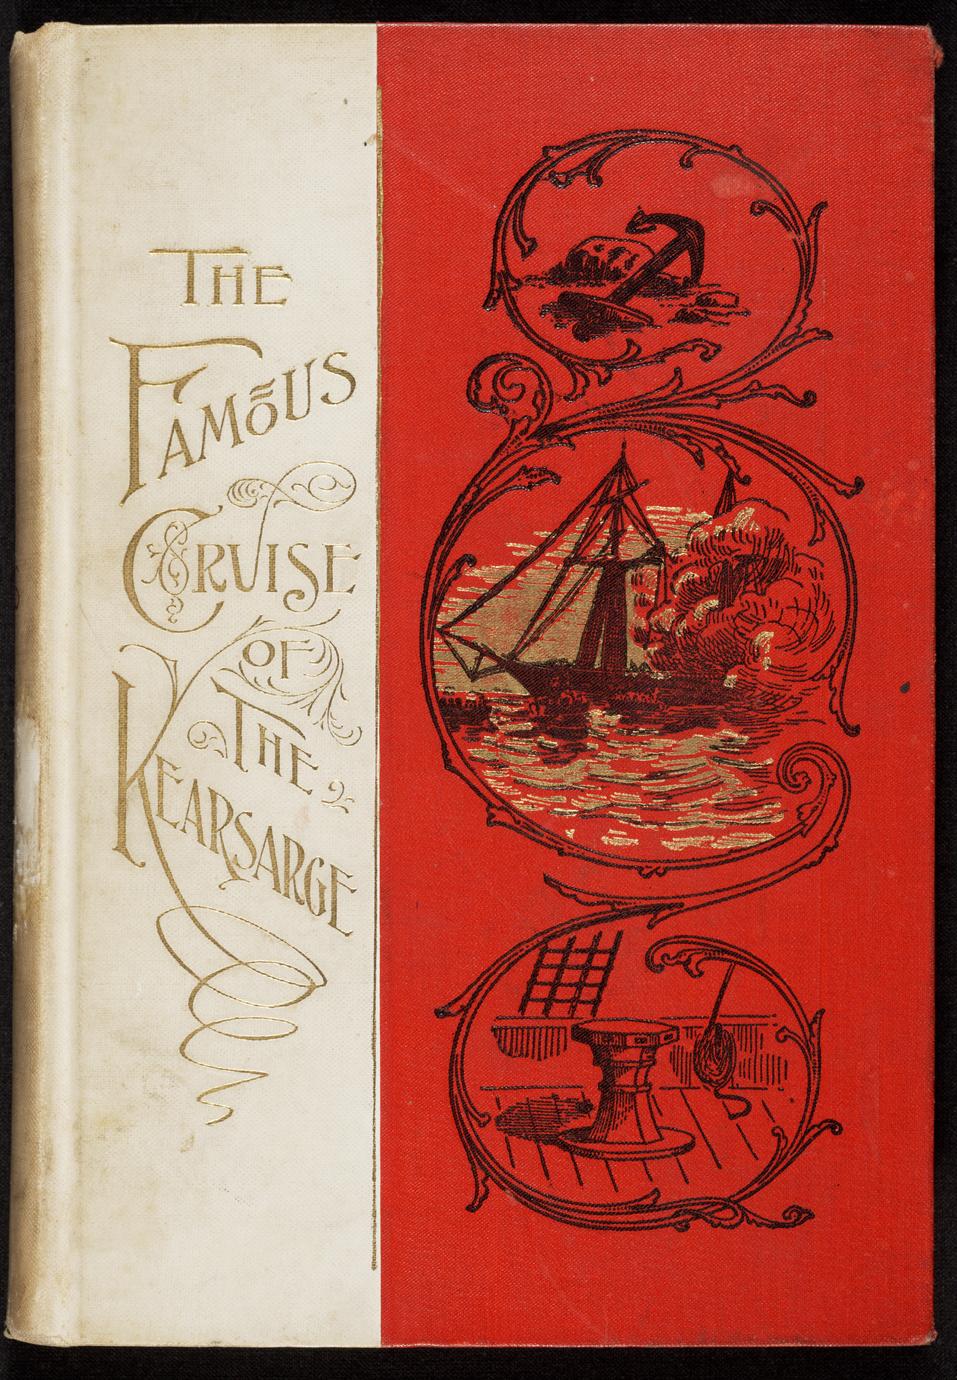 The famous cruise of the Kearsarge : an authentic account in verse of the battle with the Alabama off Cherbourg, France, on Sunday, June 19, 1864, concluding with a brief history of this famous ship, together with interesting information concerning her officers during the Civil War, to the date of her wreck on Roncador Reef in the Caribbean Sea, February 2, 1894 (1 of 3)